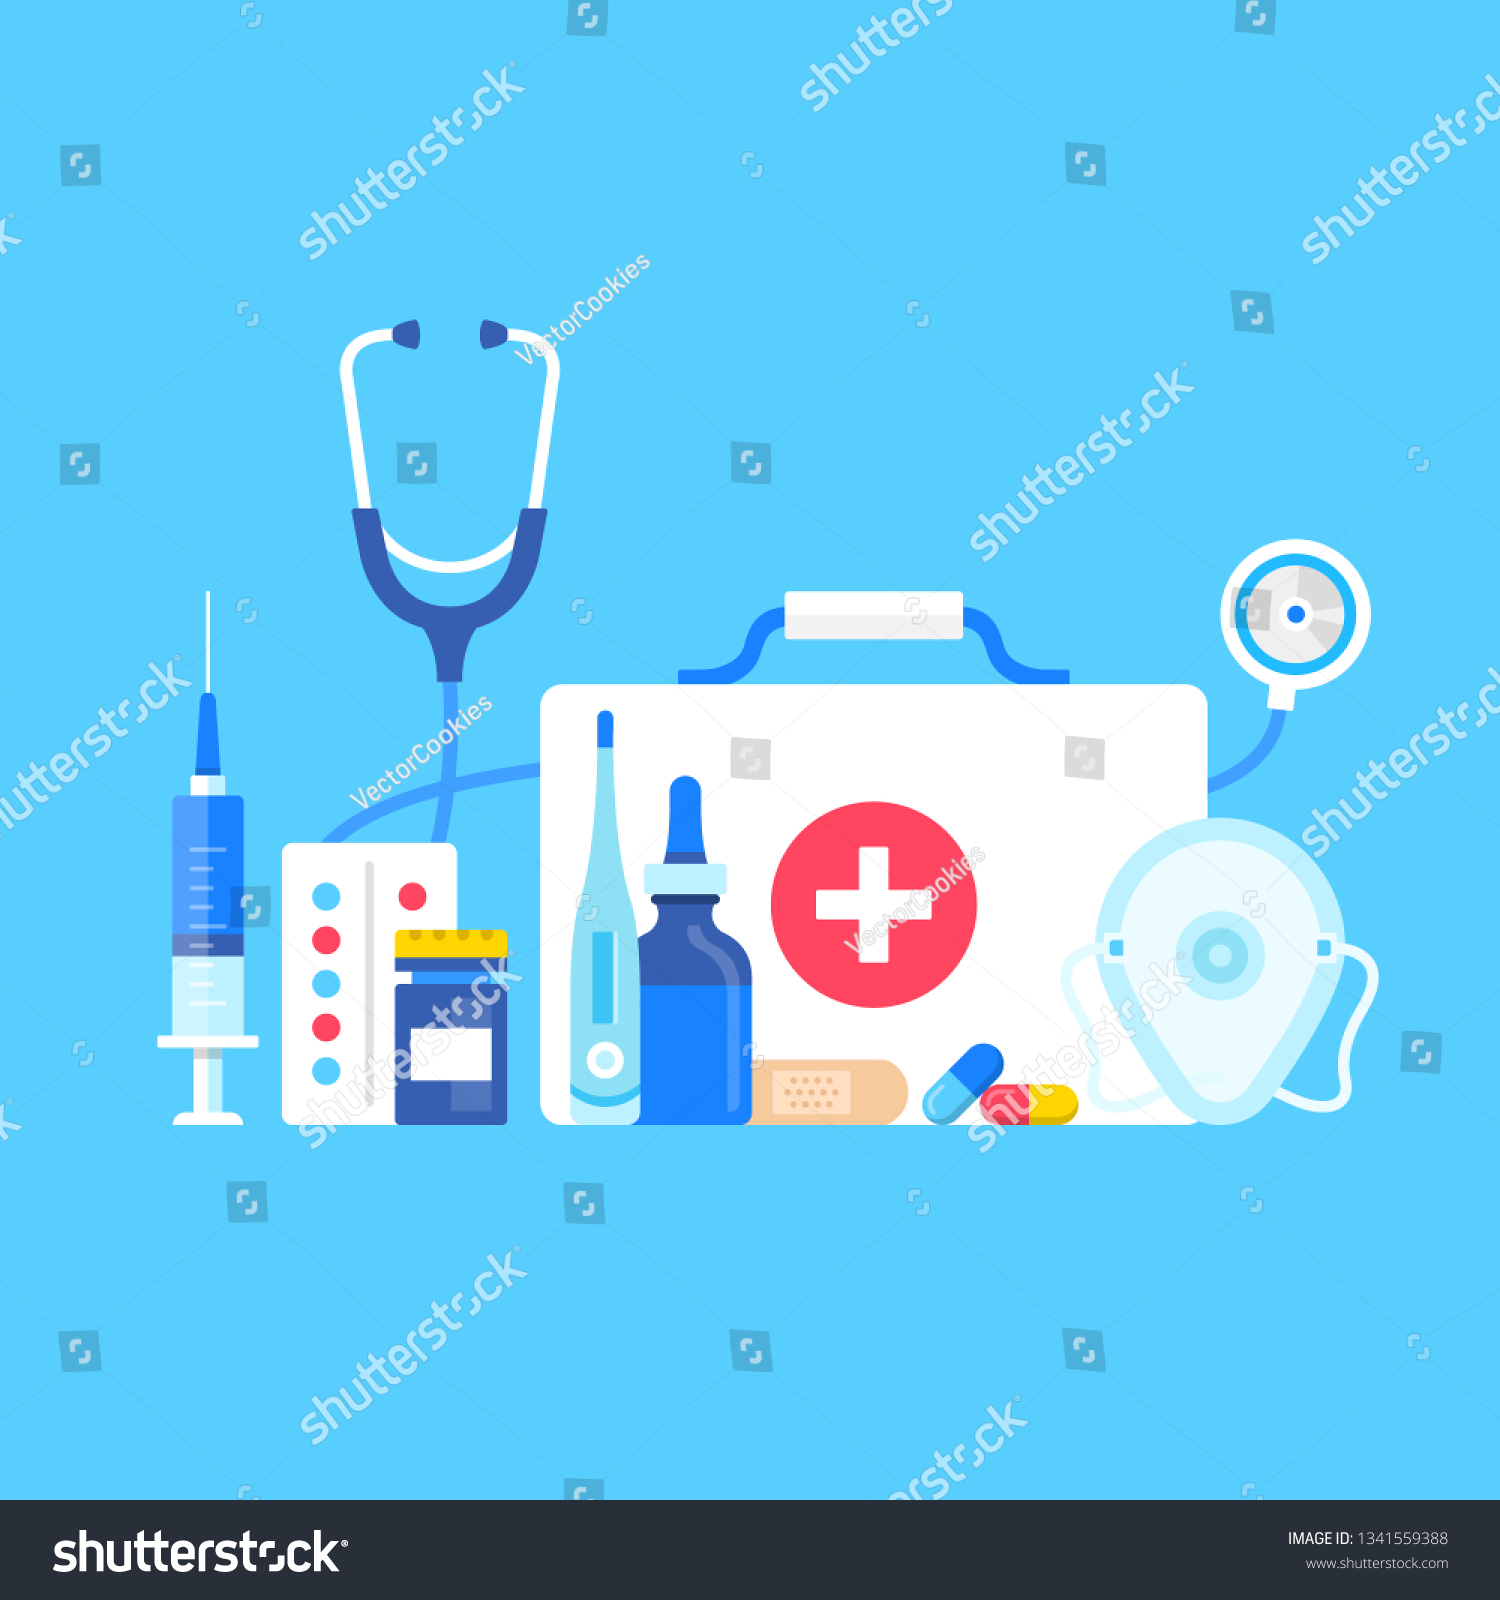 First aid kit. Vector illustration. Medical supplies, medical equipment concepts. Flat design. First aid kit with medical cross, stethoscope, syringe, pocket mask, pills, thermometer, adhesive bandage #1341559388